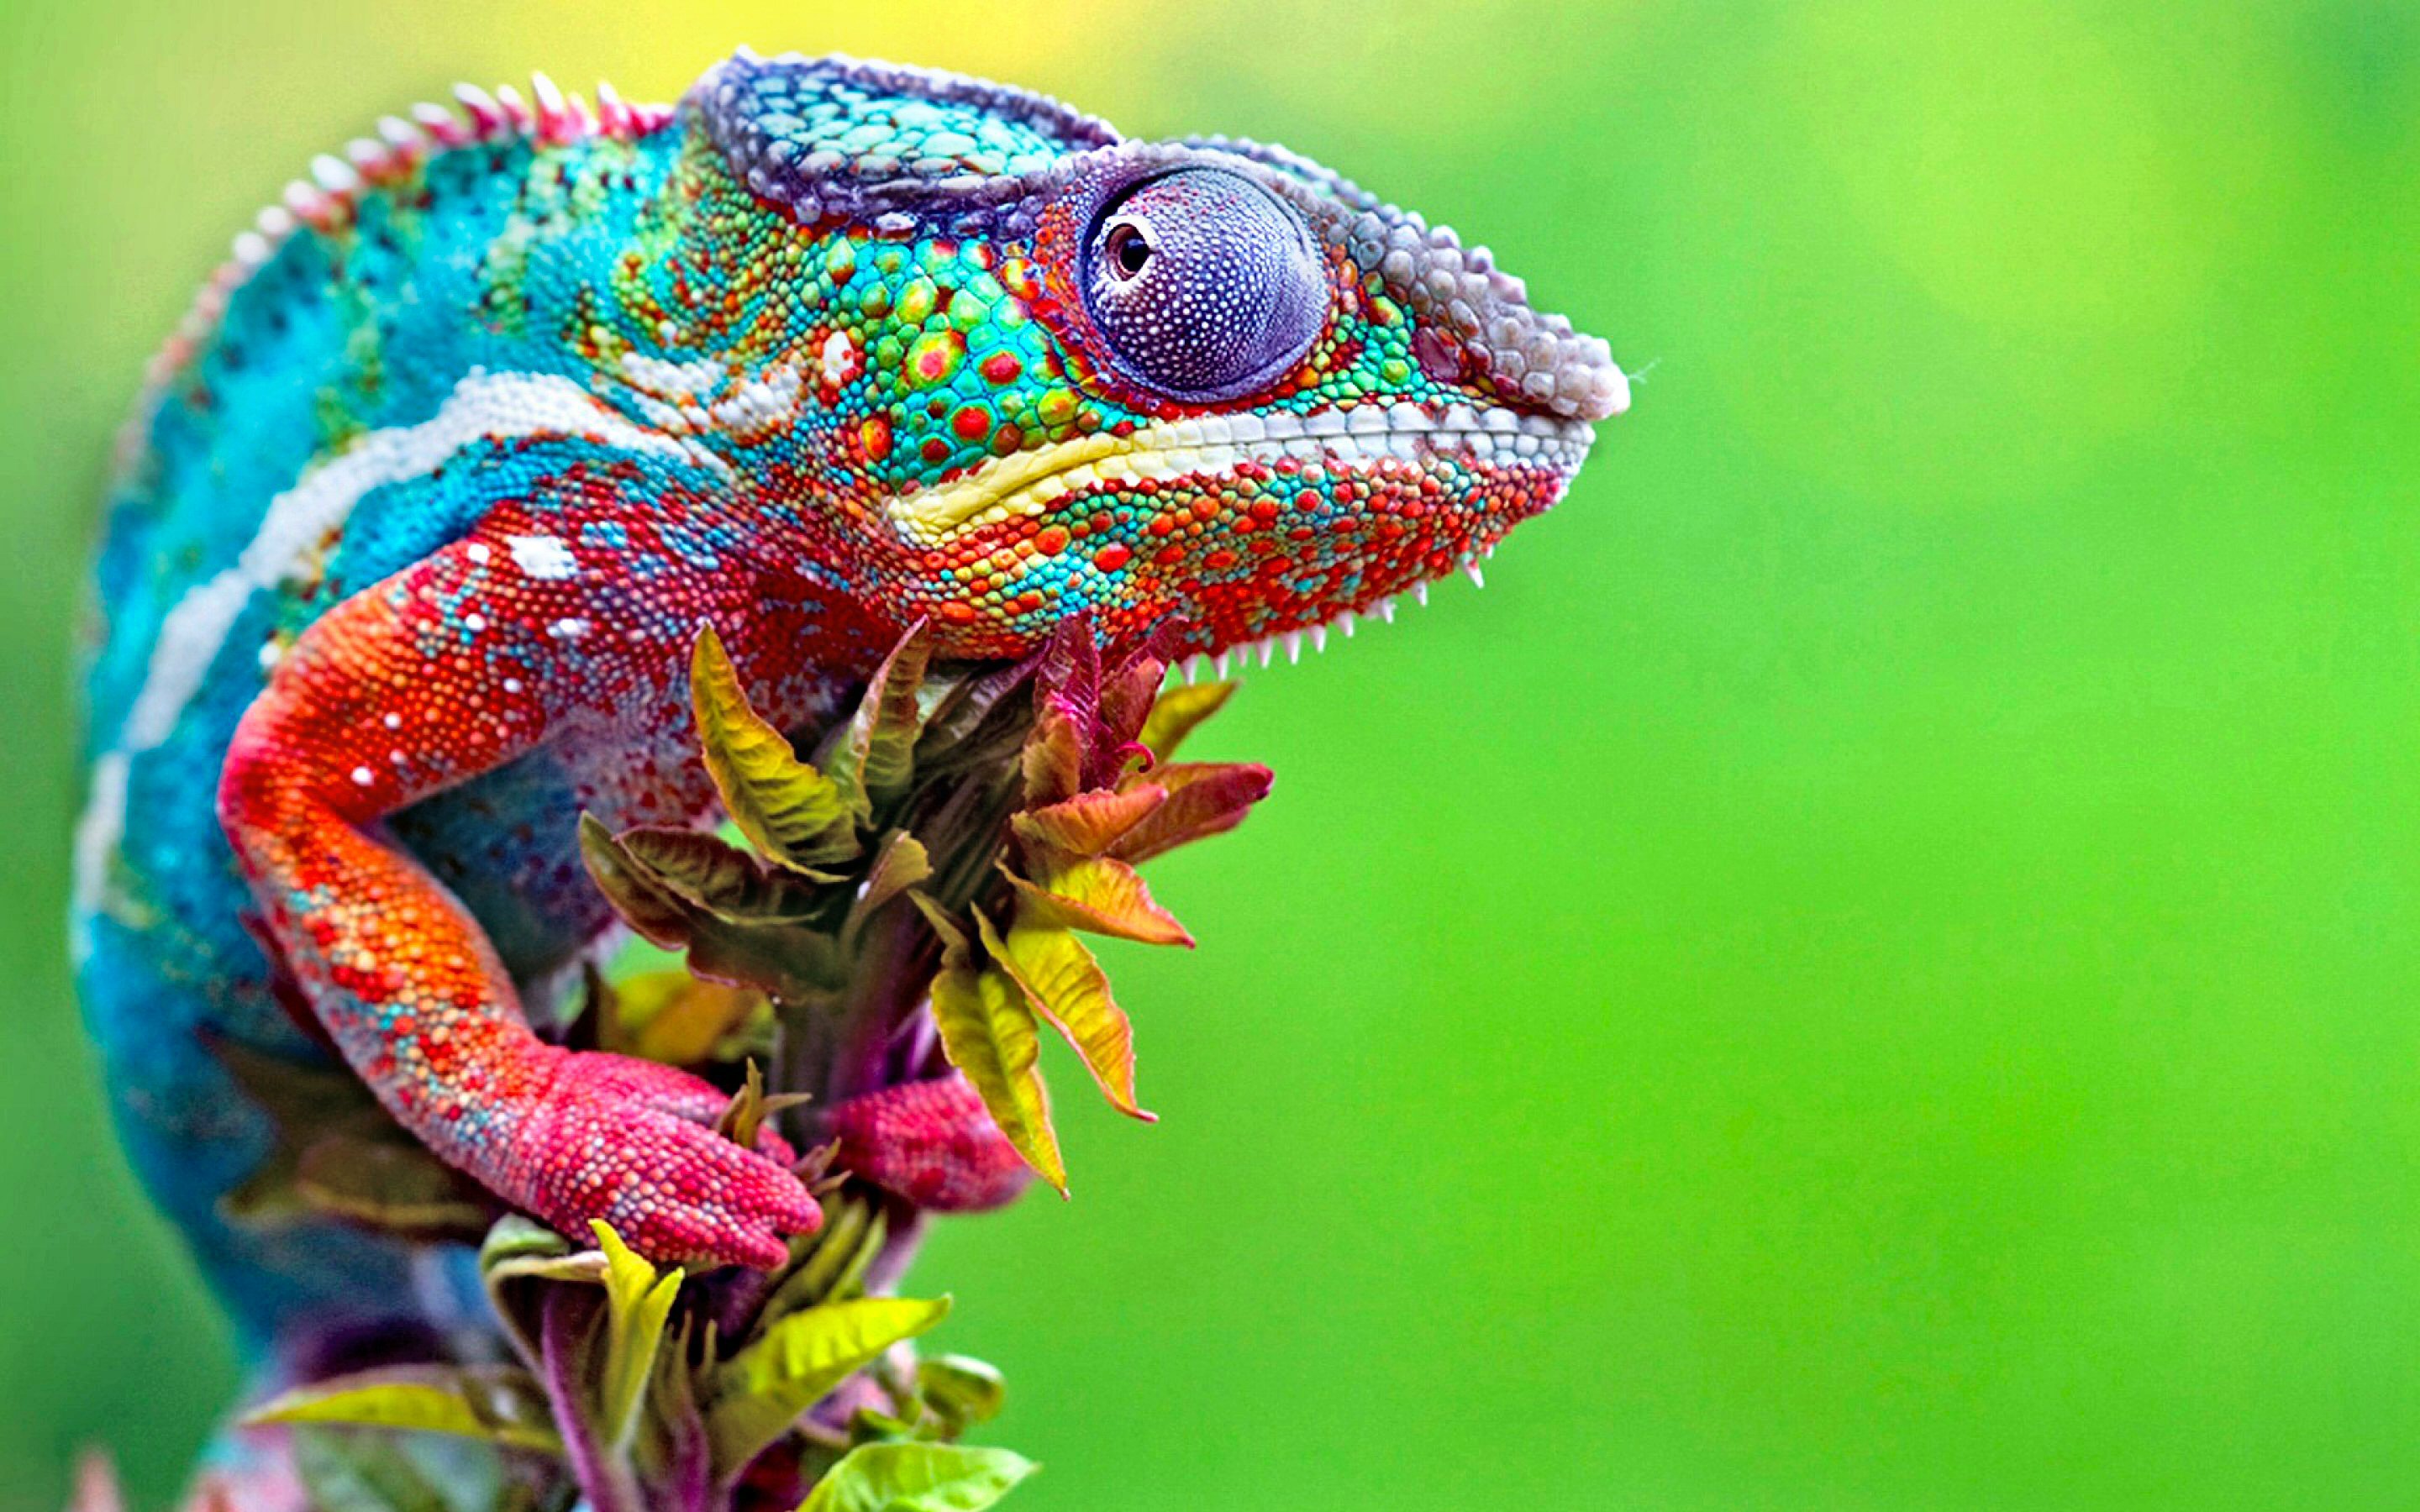 panther chameleon [19april2014saturday] [Computer Wallpapers